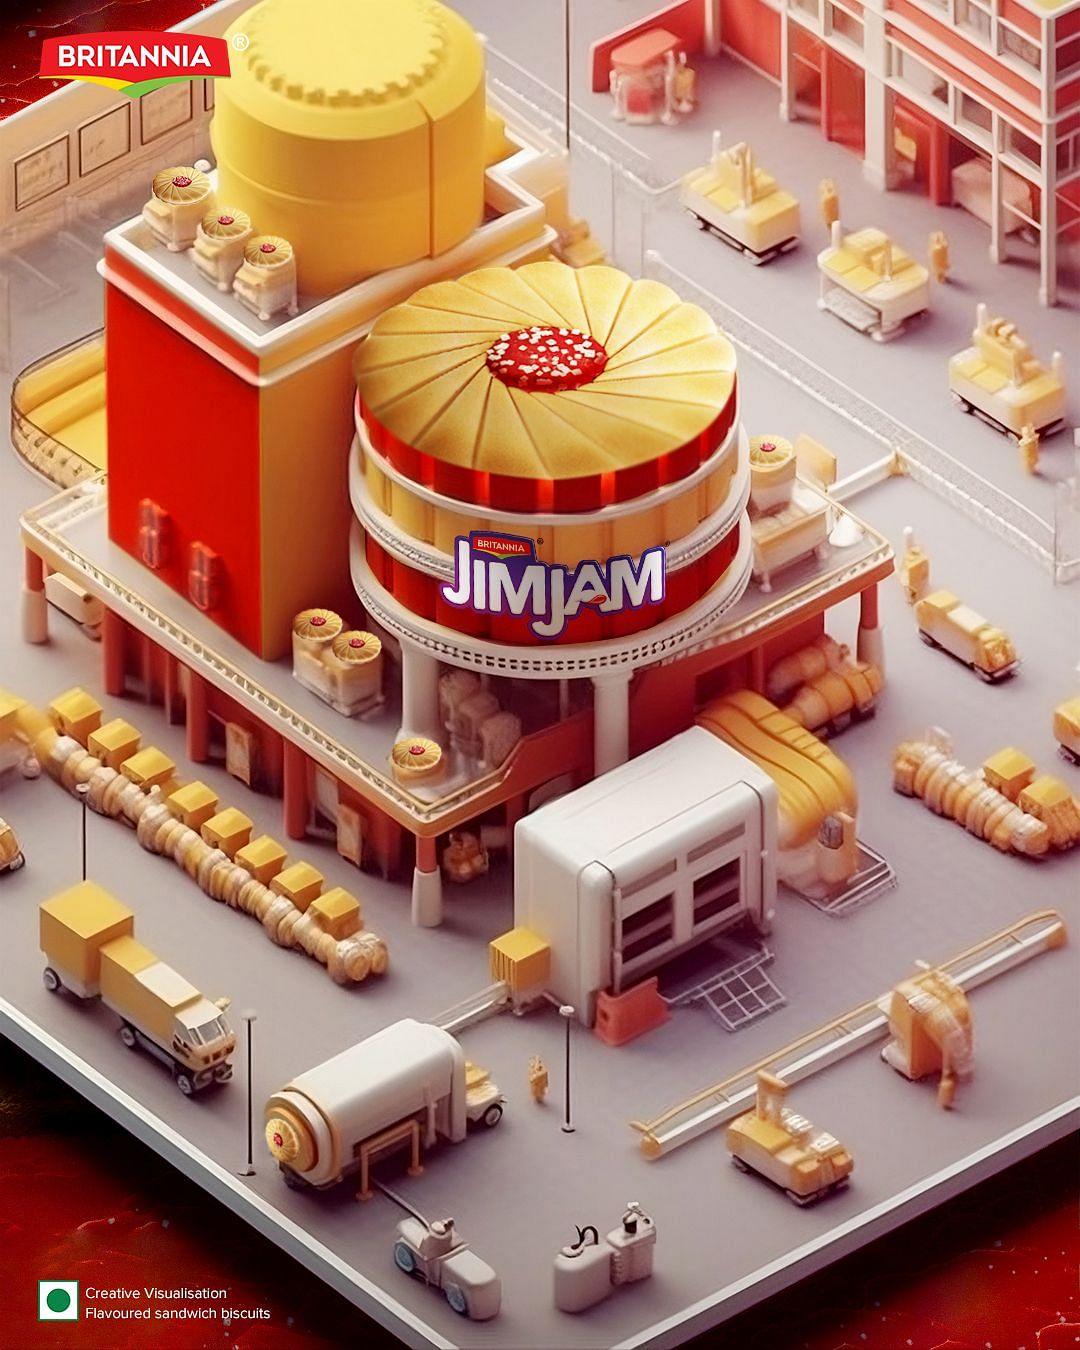 Schbang creates Britannia's 'world of biscuits' with AI